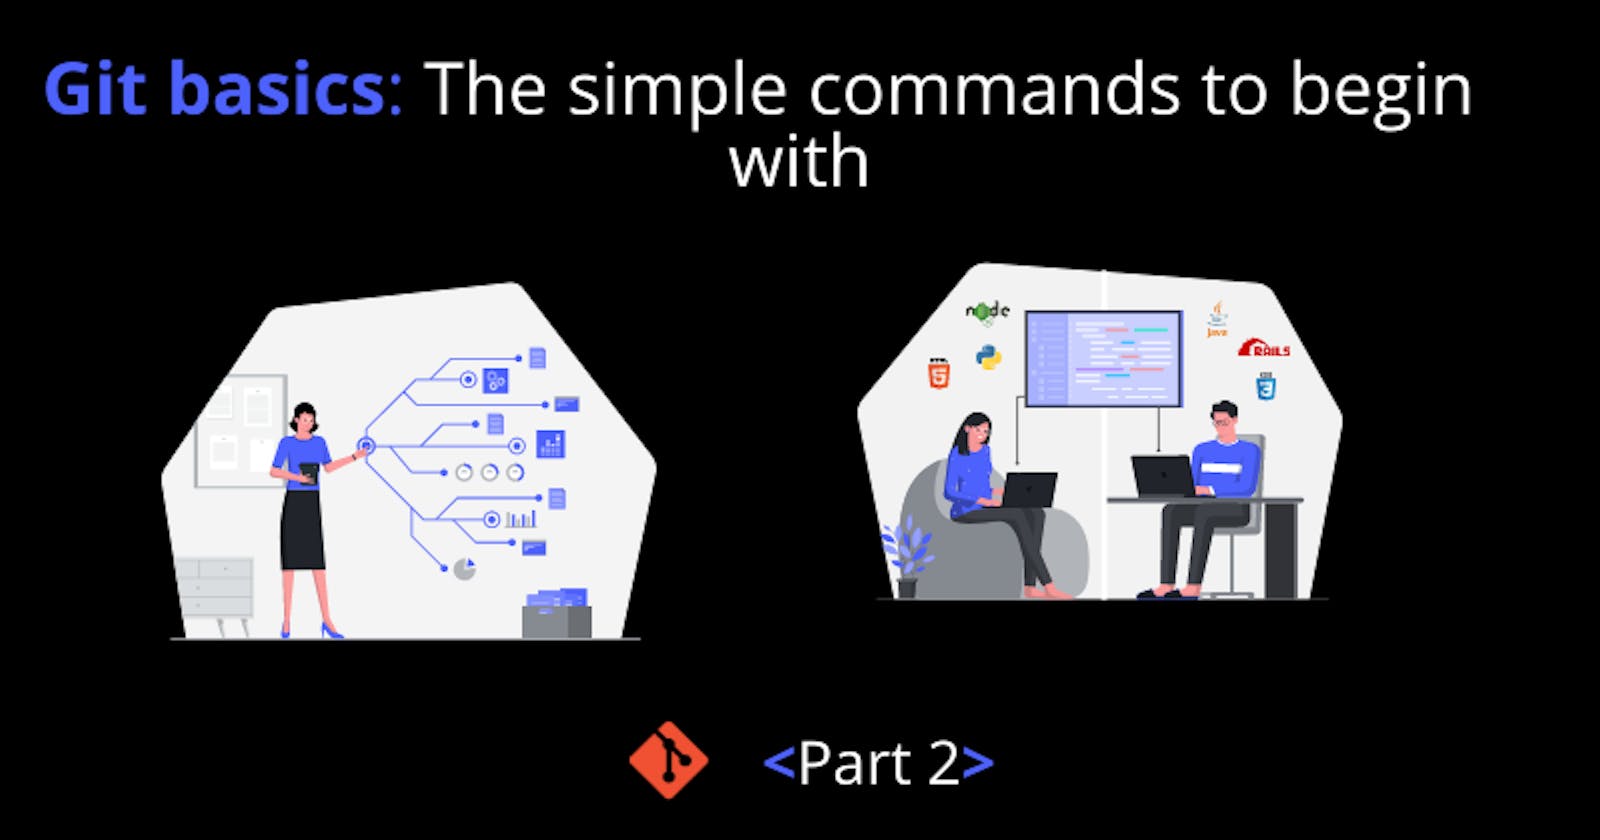 Git basics: The simple commands to begin with